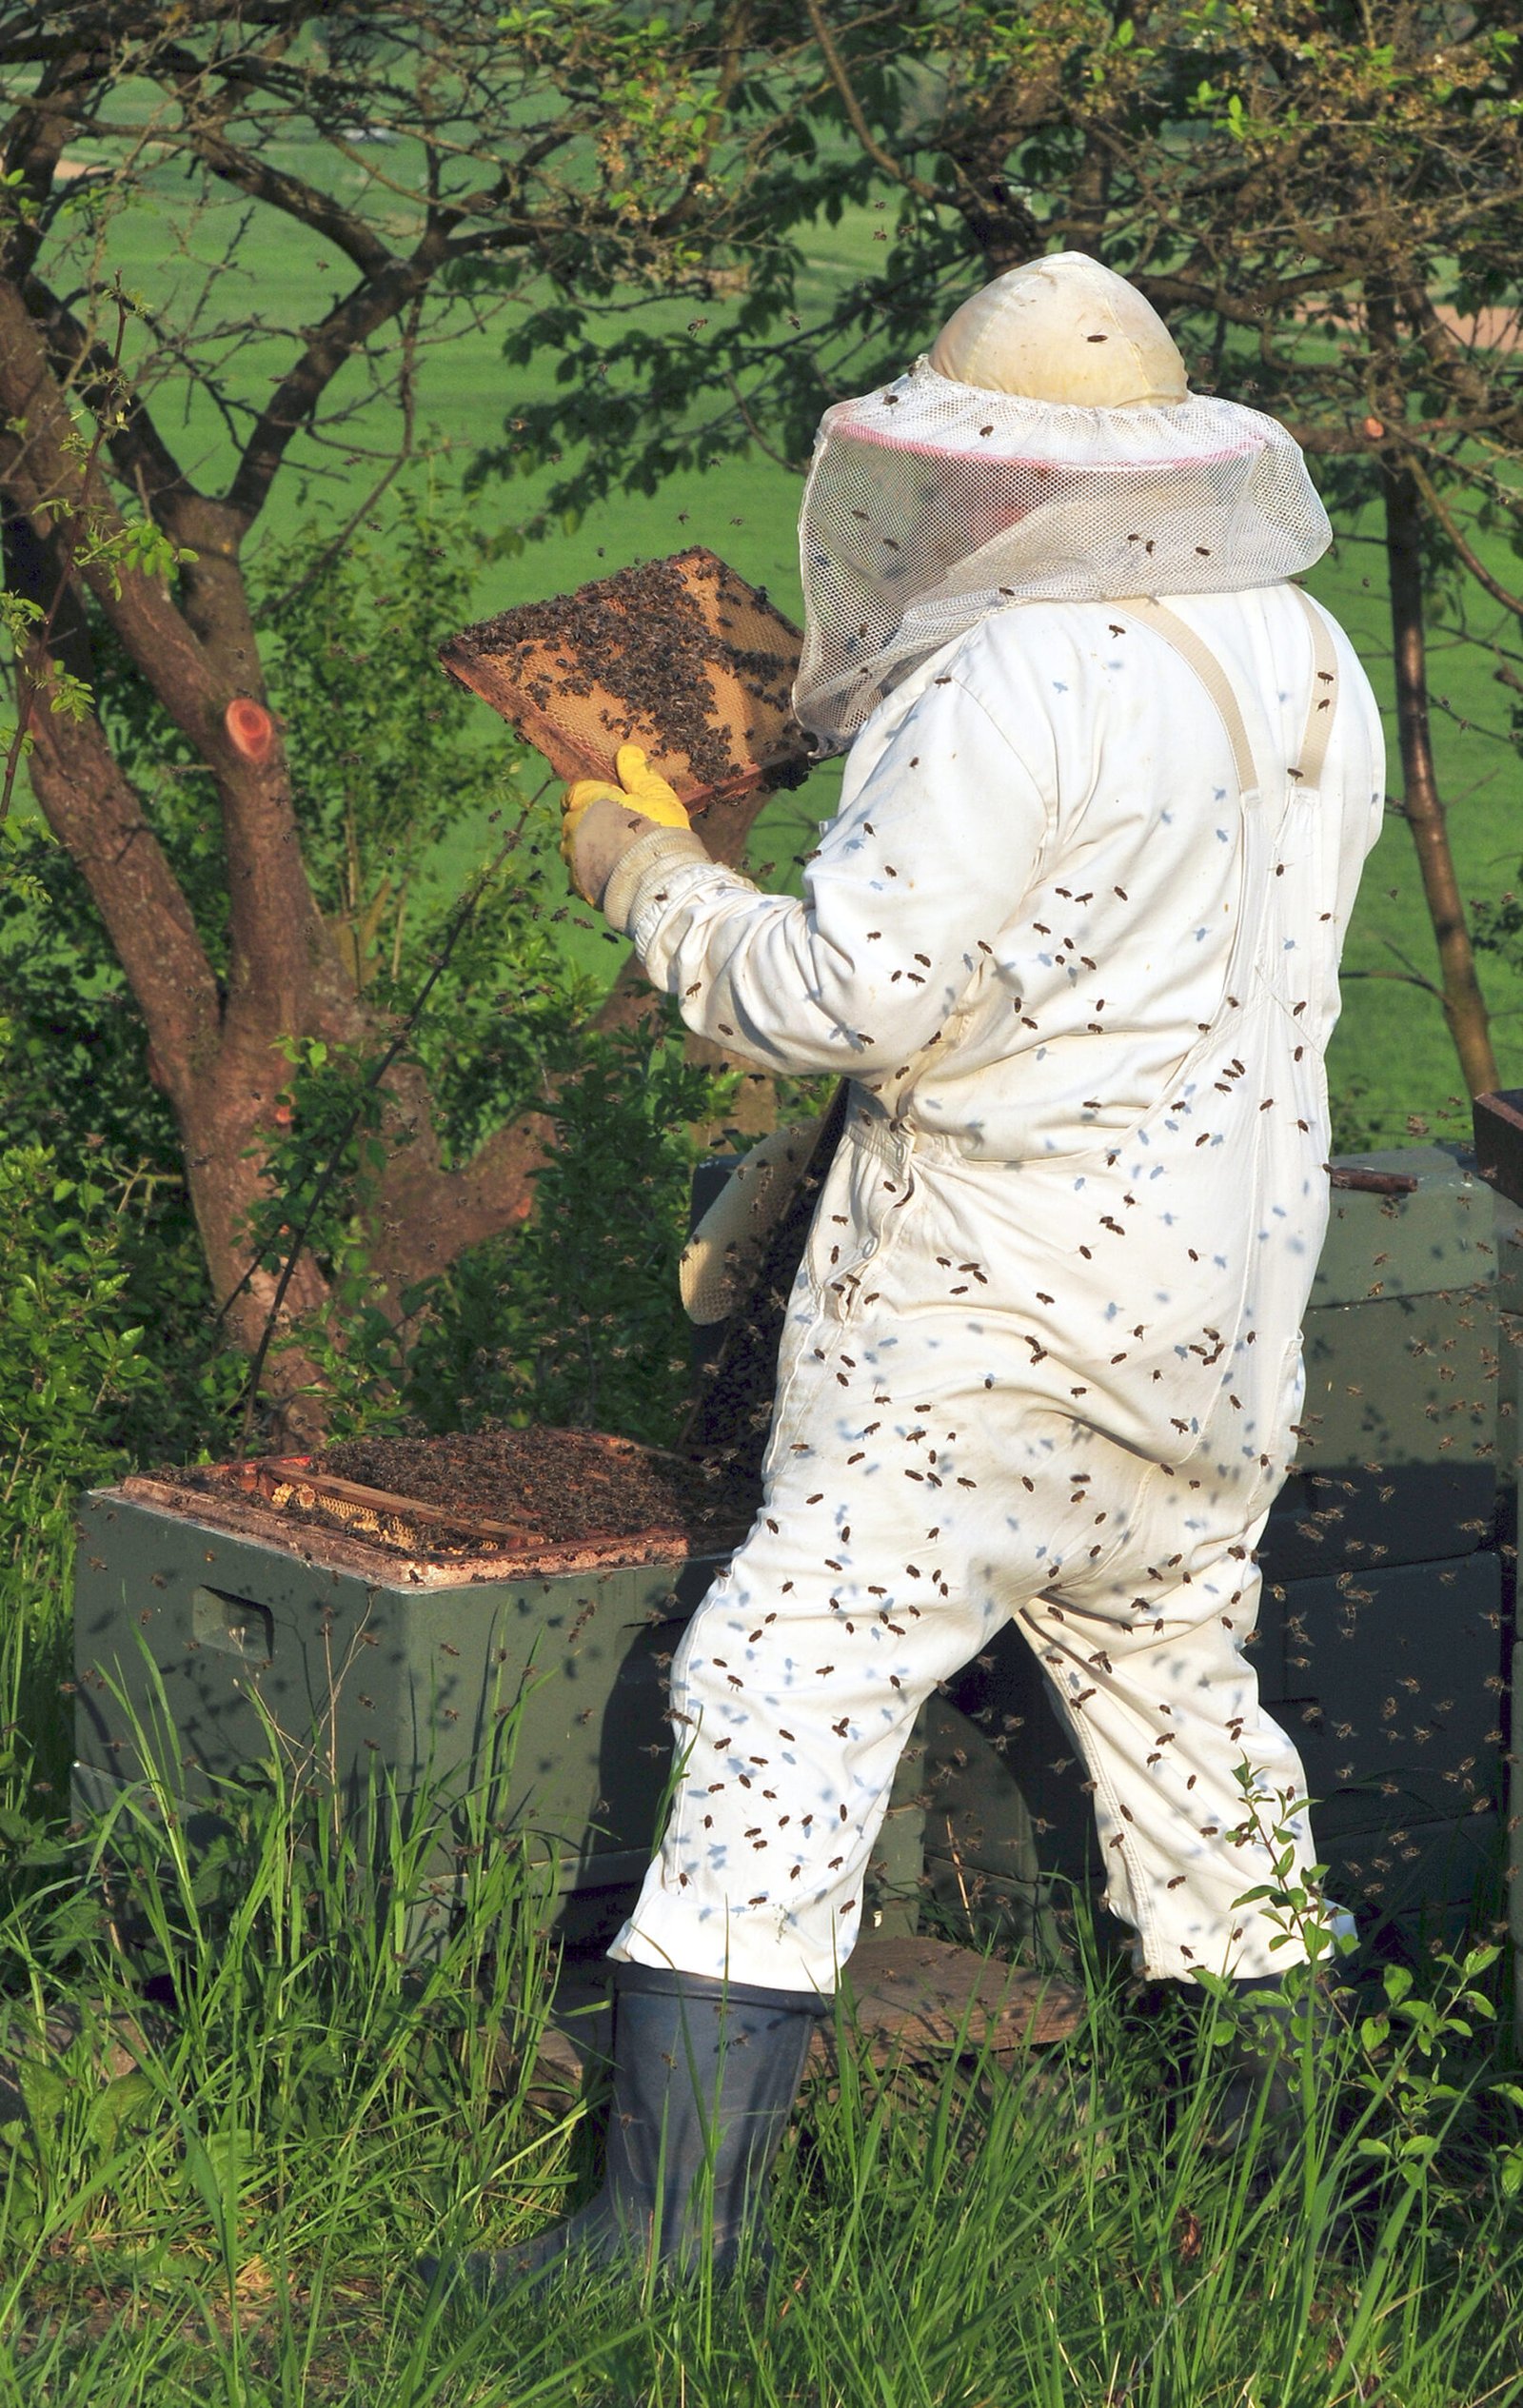 The Role of Beekeeping in Disaster Relief